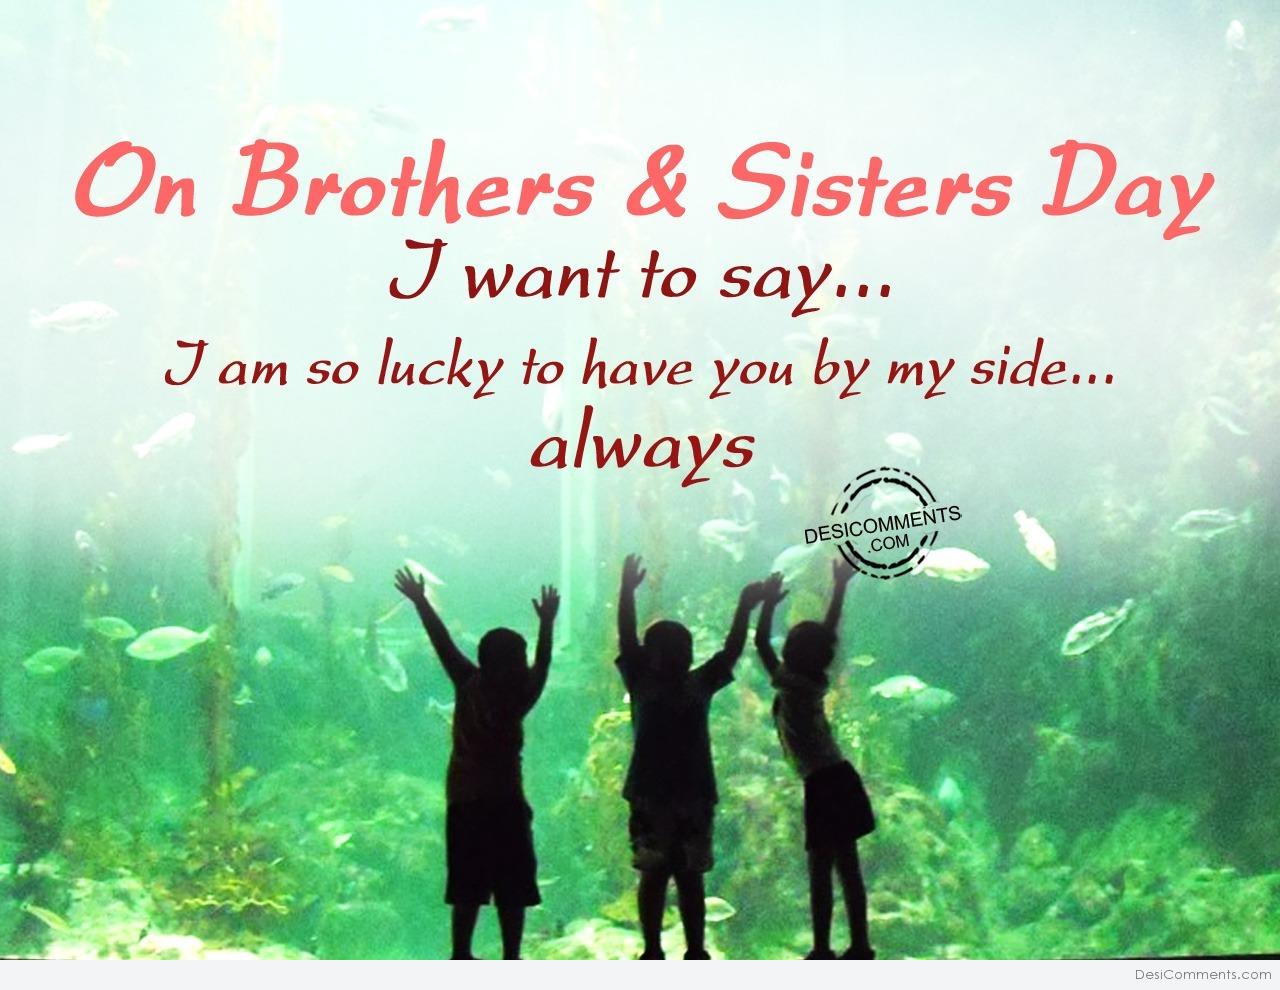 On Brothers & Sisters Day, I want to say - DesiComments.com